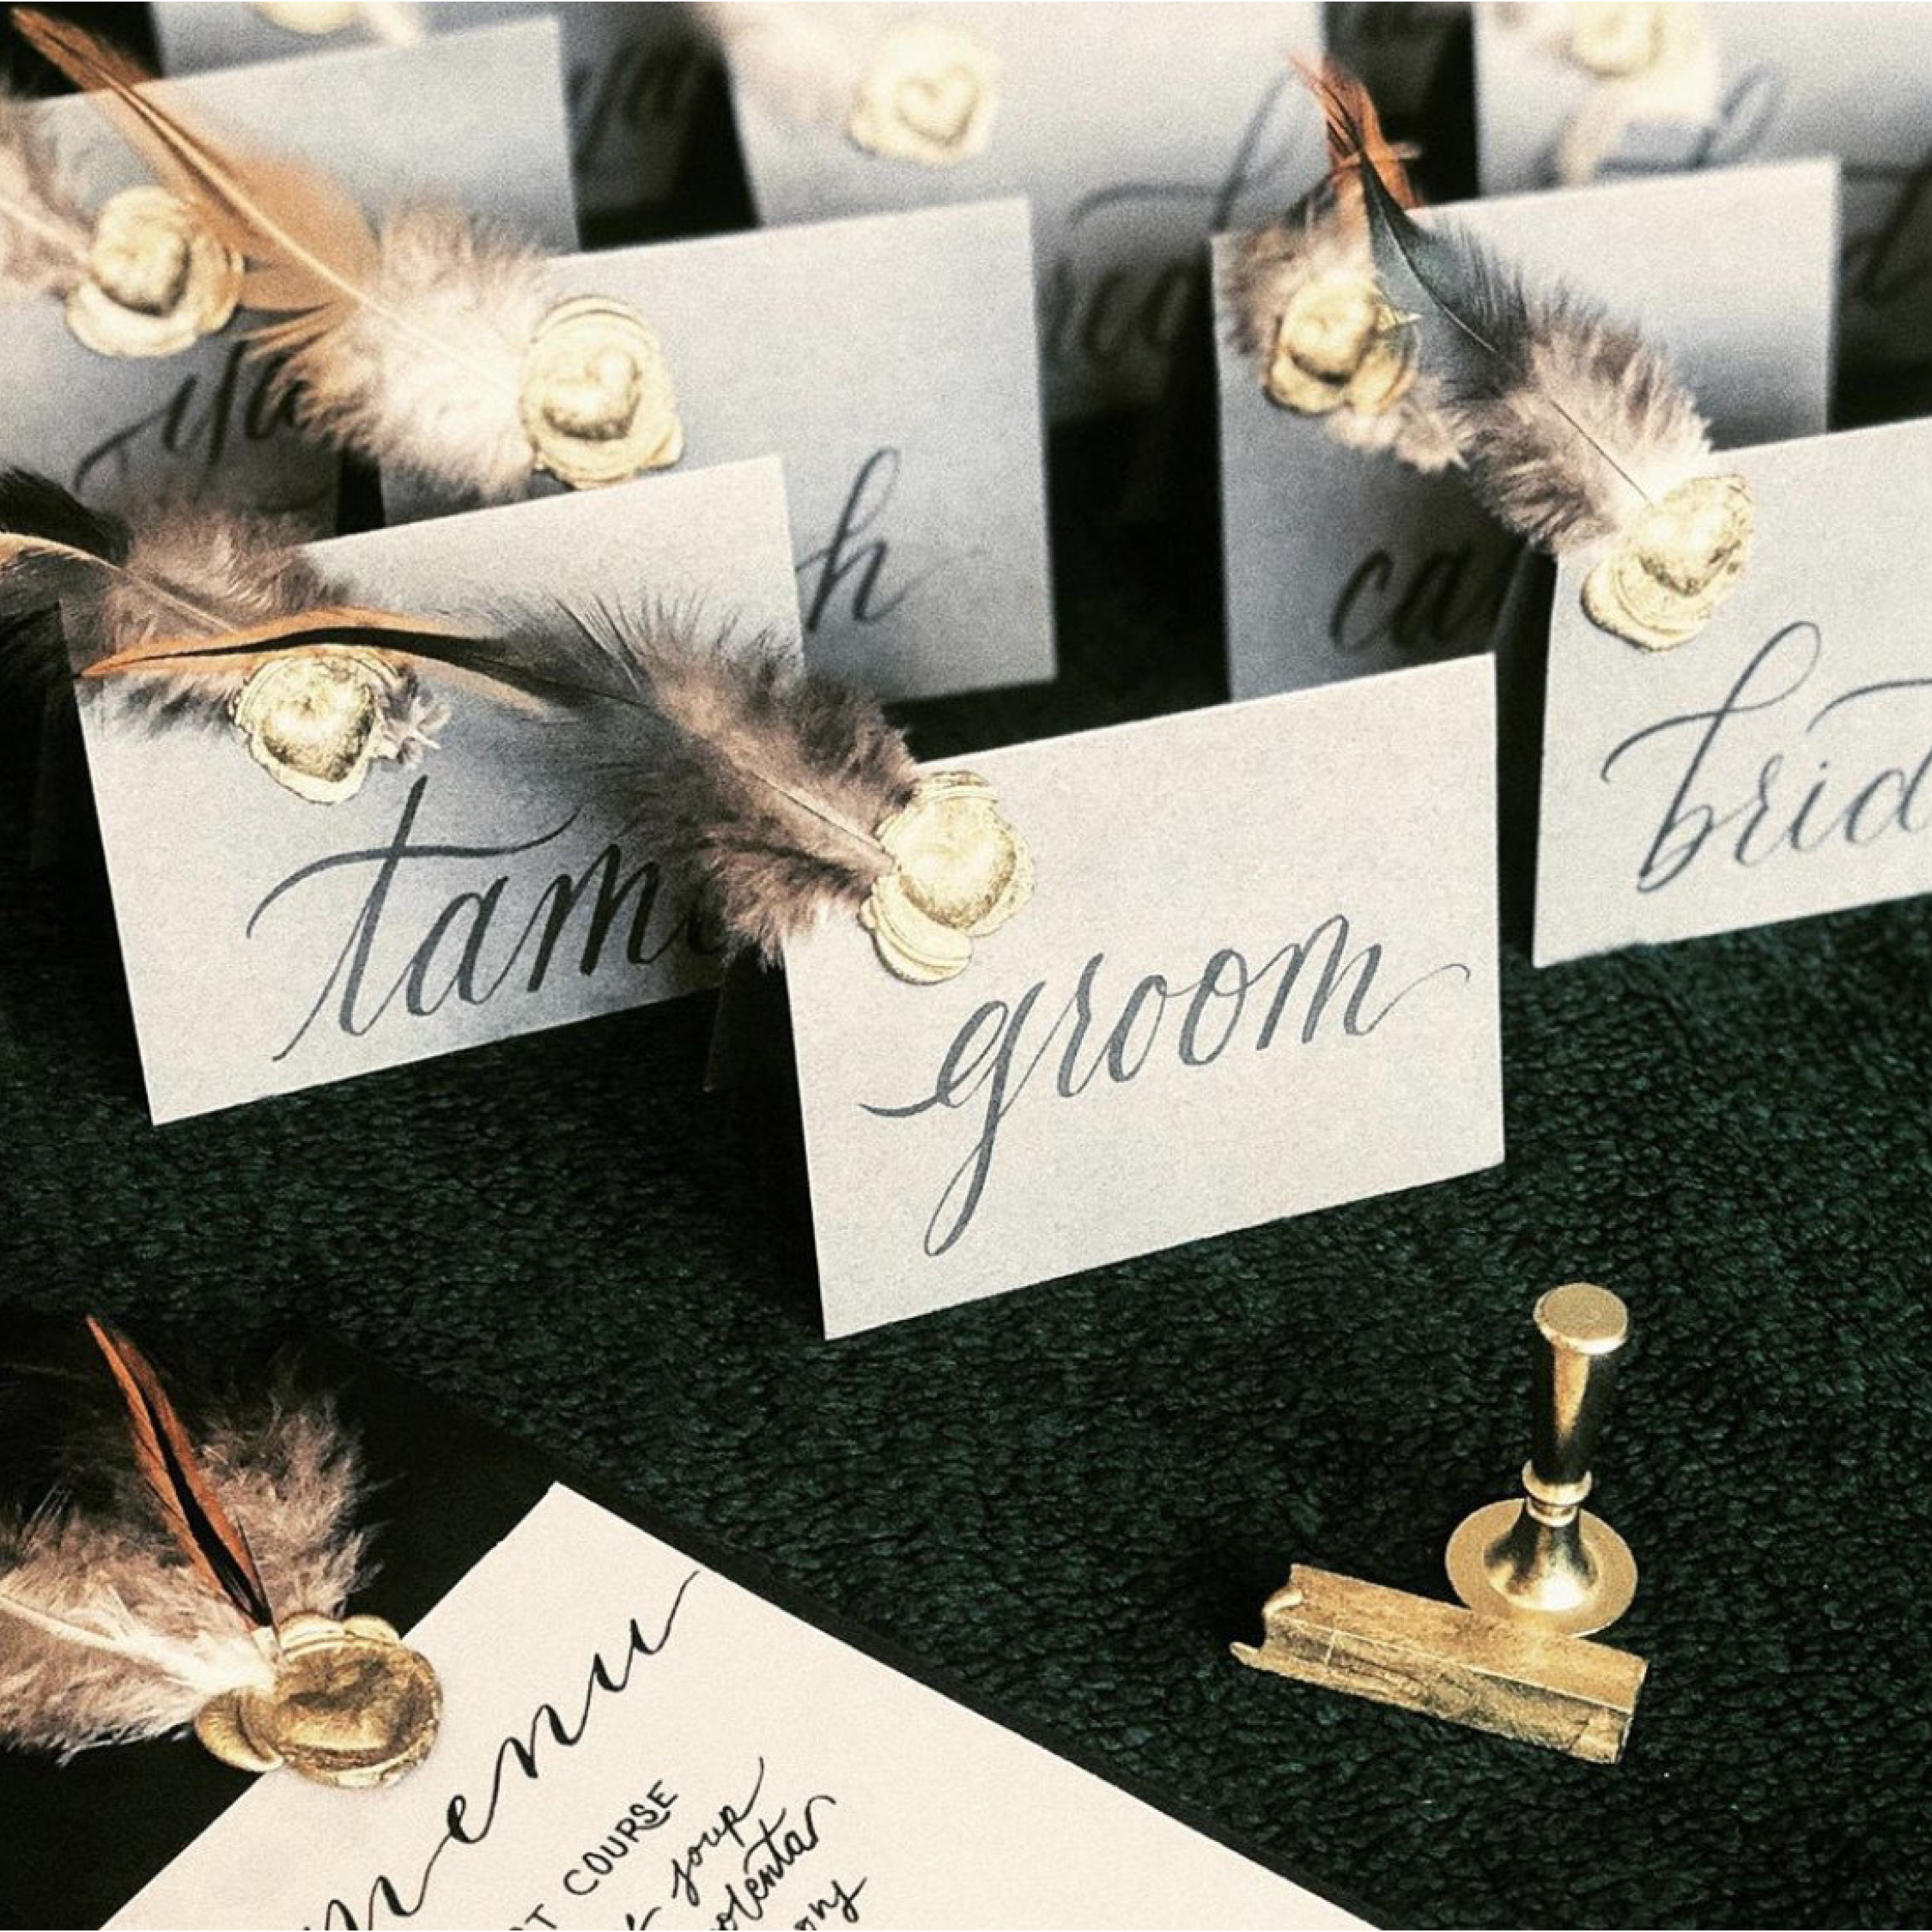 Wedding decorations with feathers, stationery with feathers